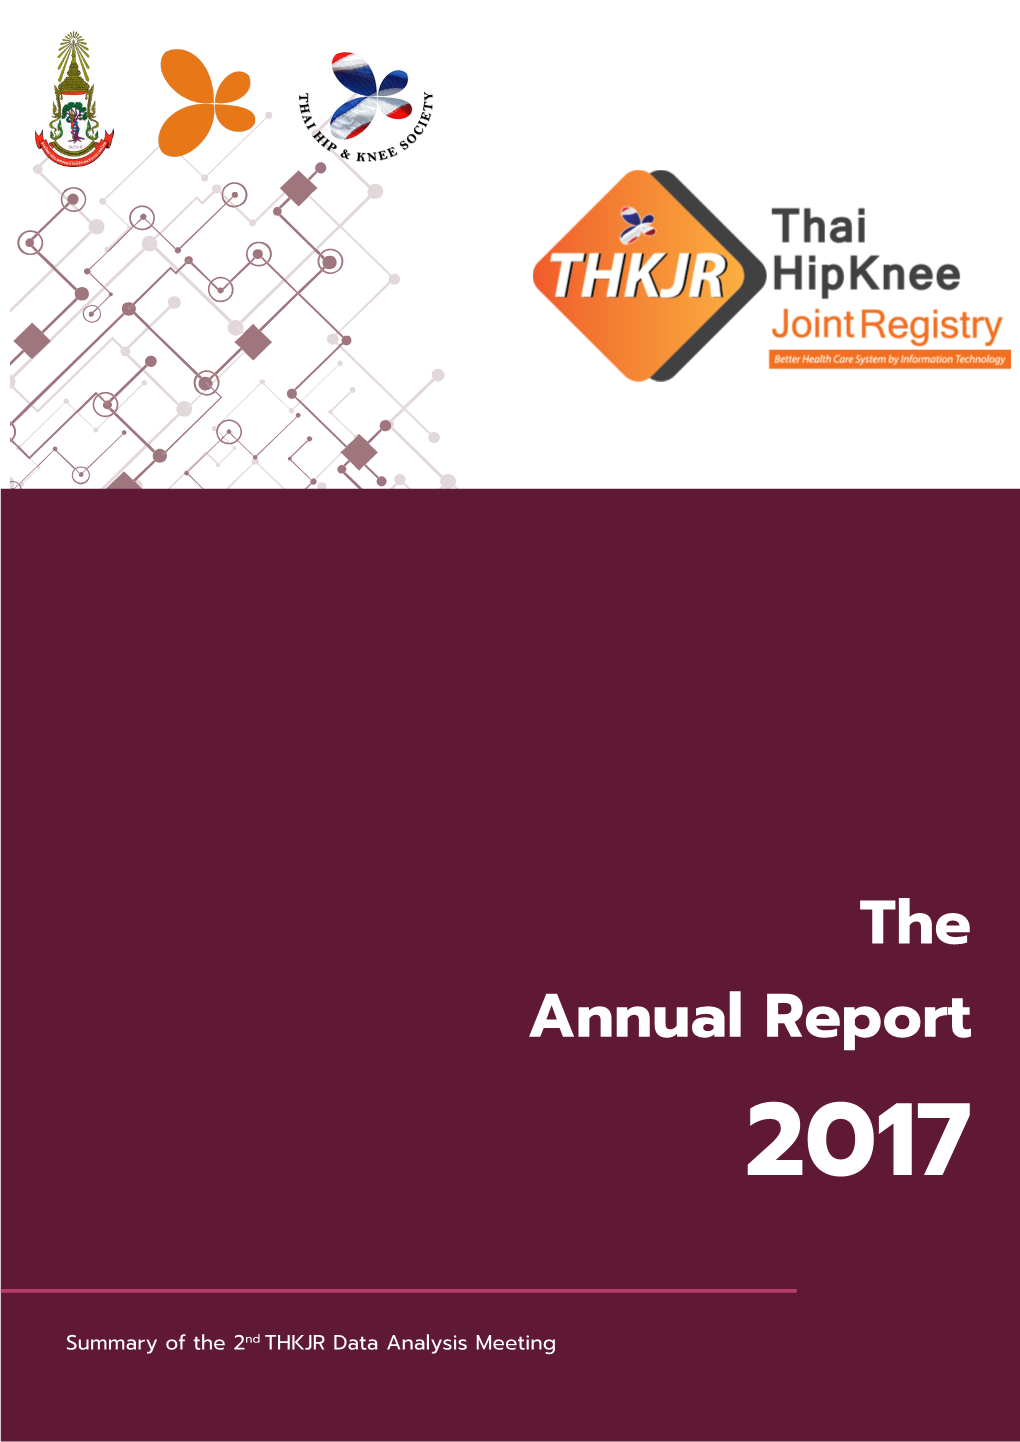 The Annual Report 2017